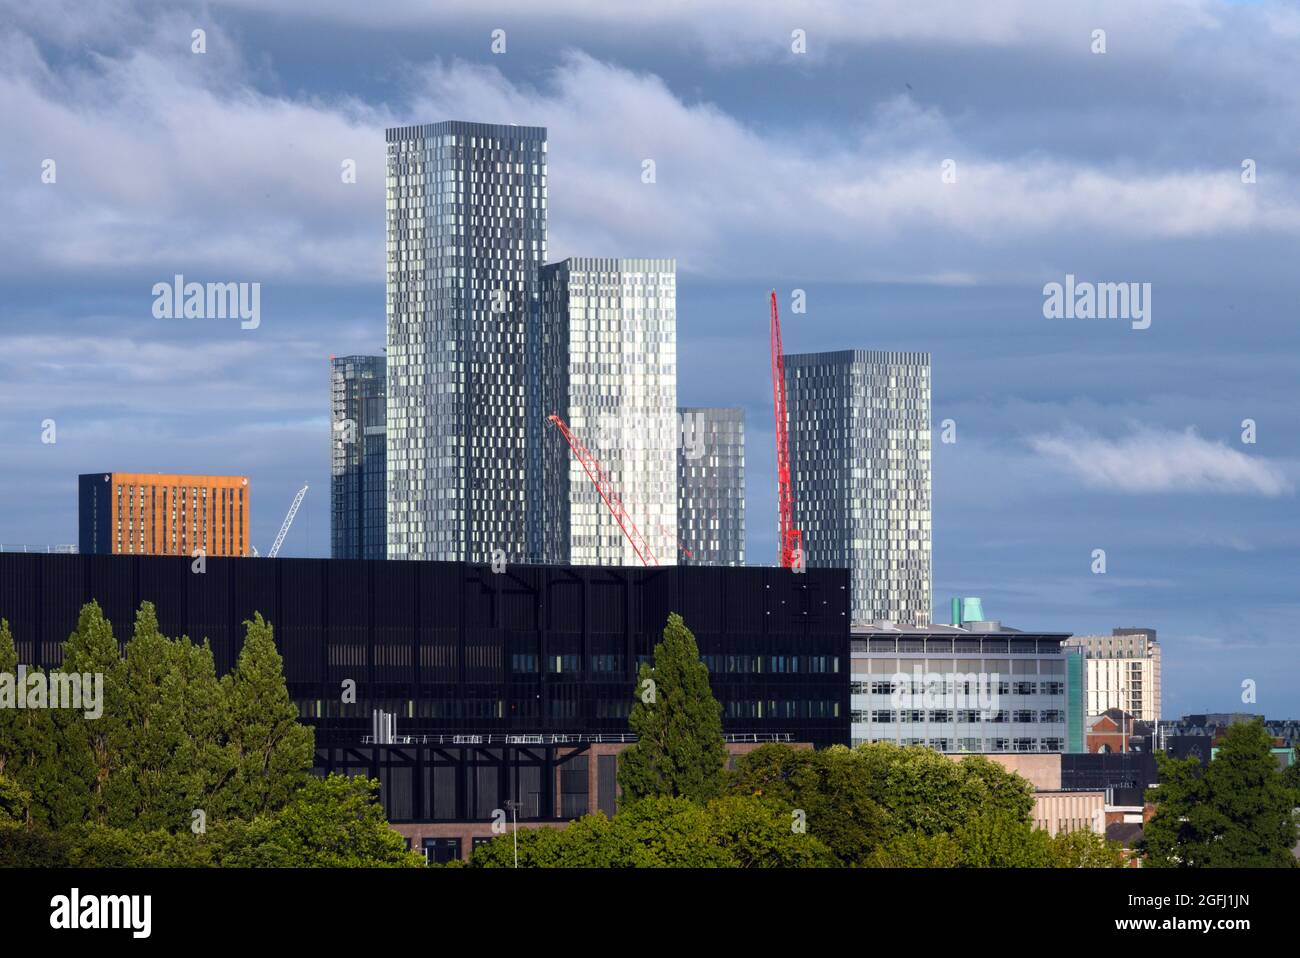 A high level view of new skyscrapers in central Manchester, England, United Kingdom, seen from the South of the city Stock Photo